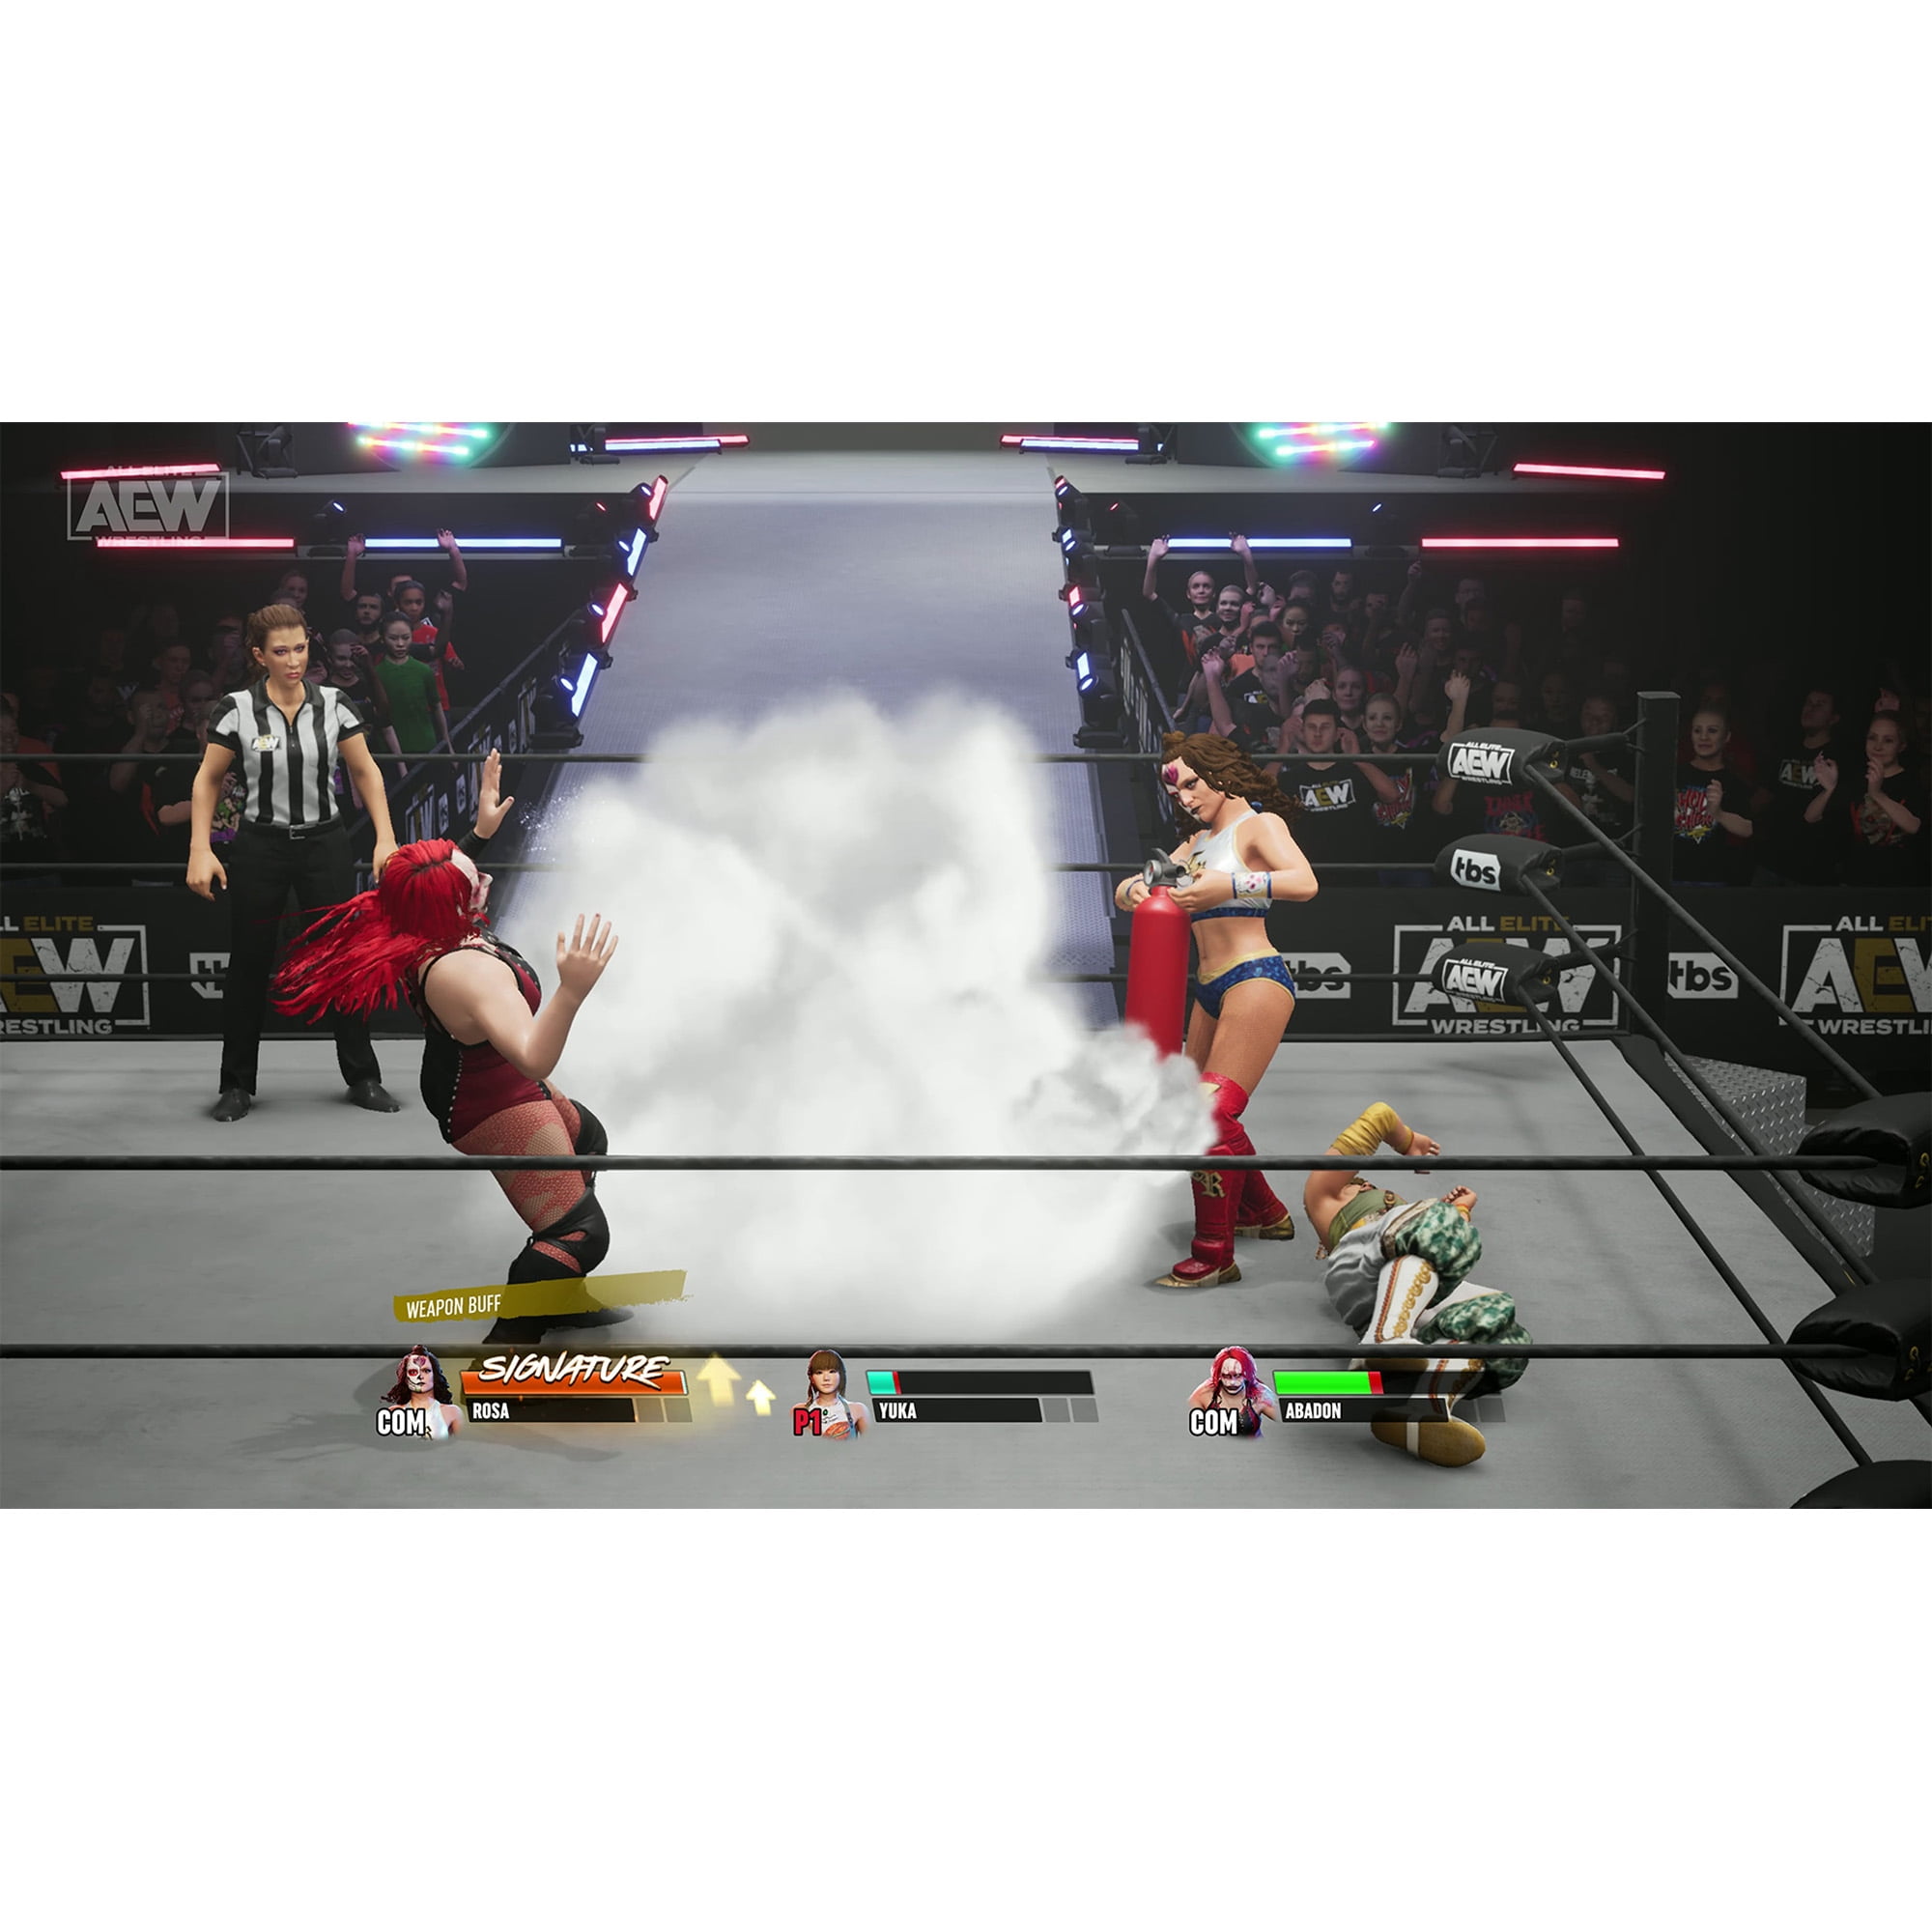 Nintendo AEW: Forever - Fight Switch